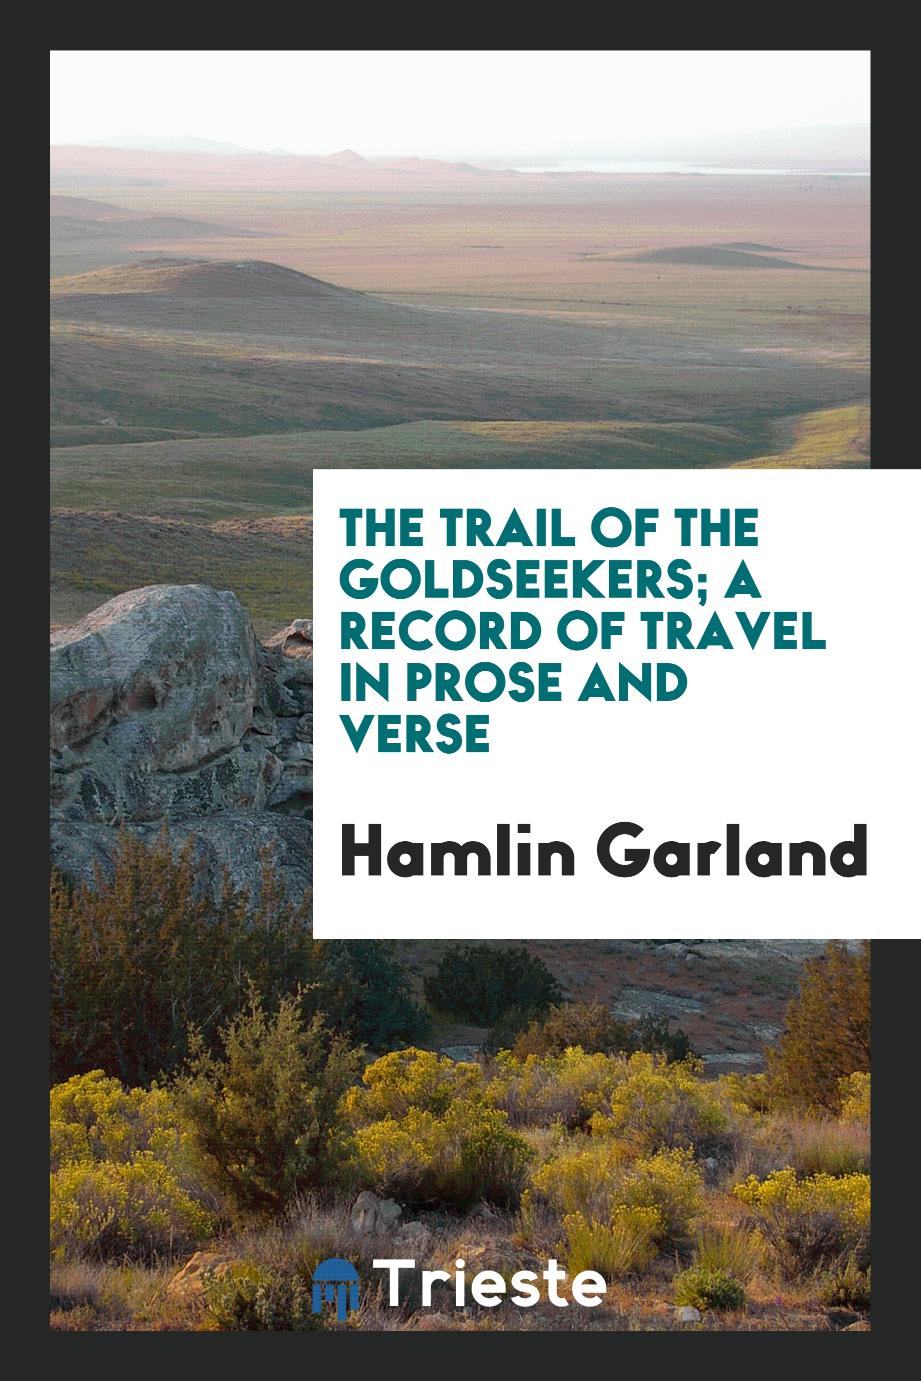 The trail of the goldseekers; a record of travel in prose and verse